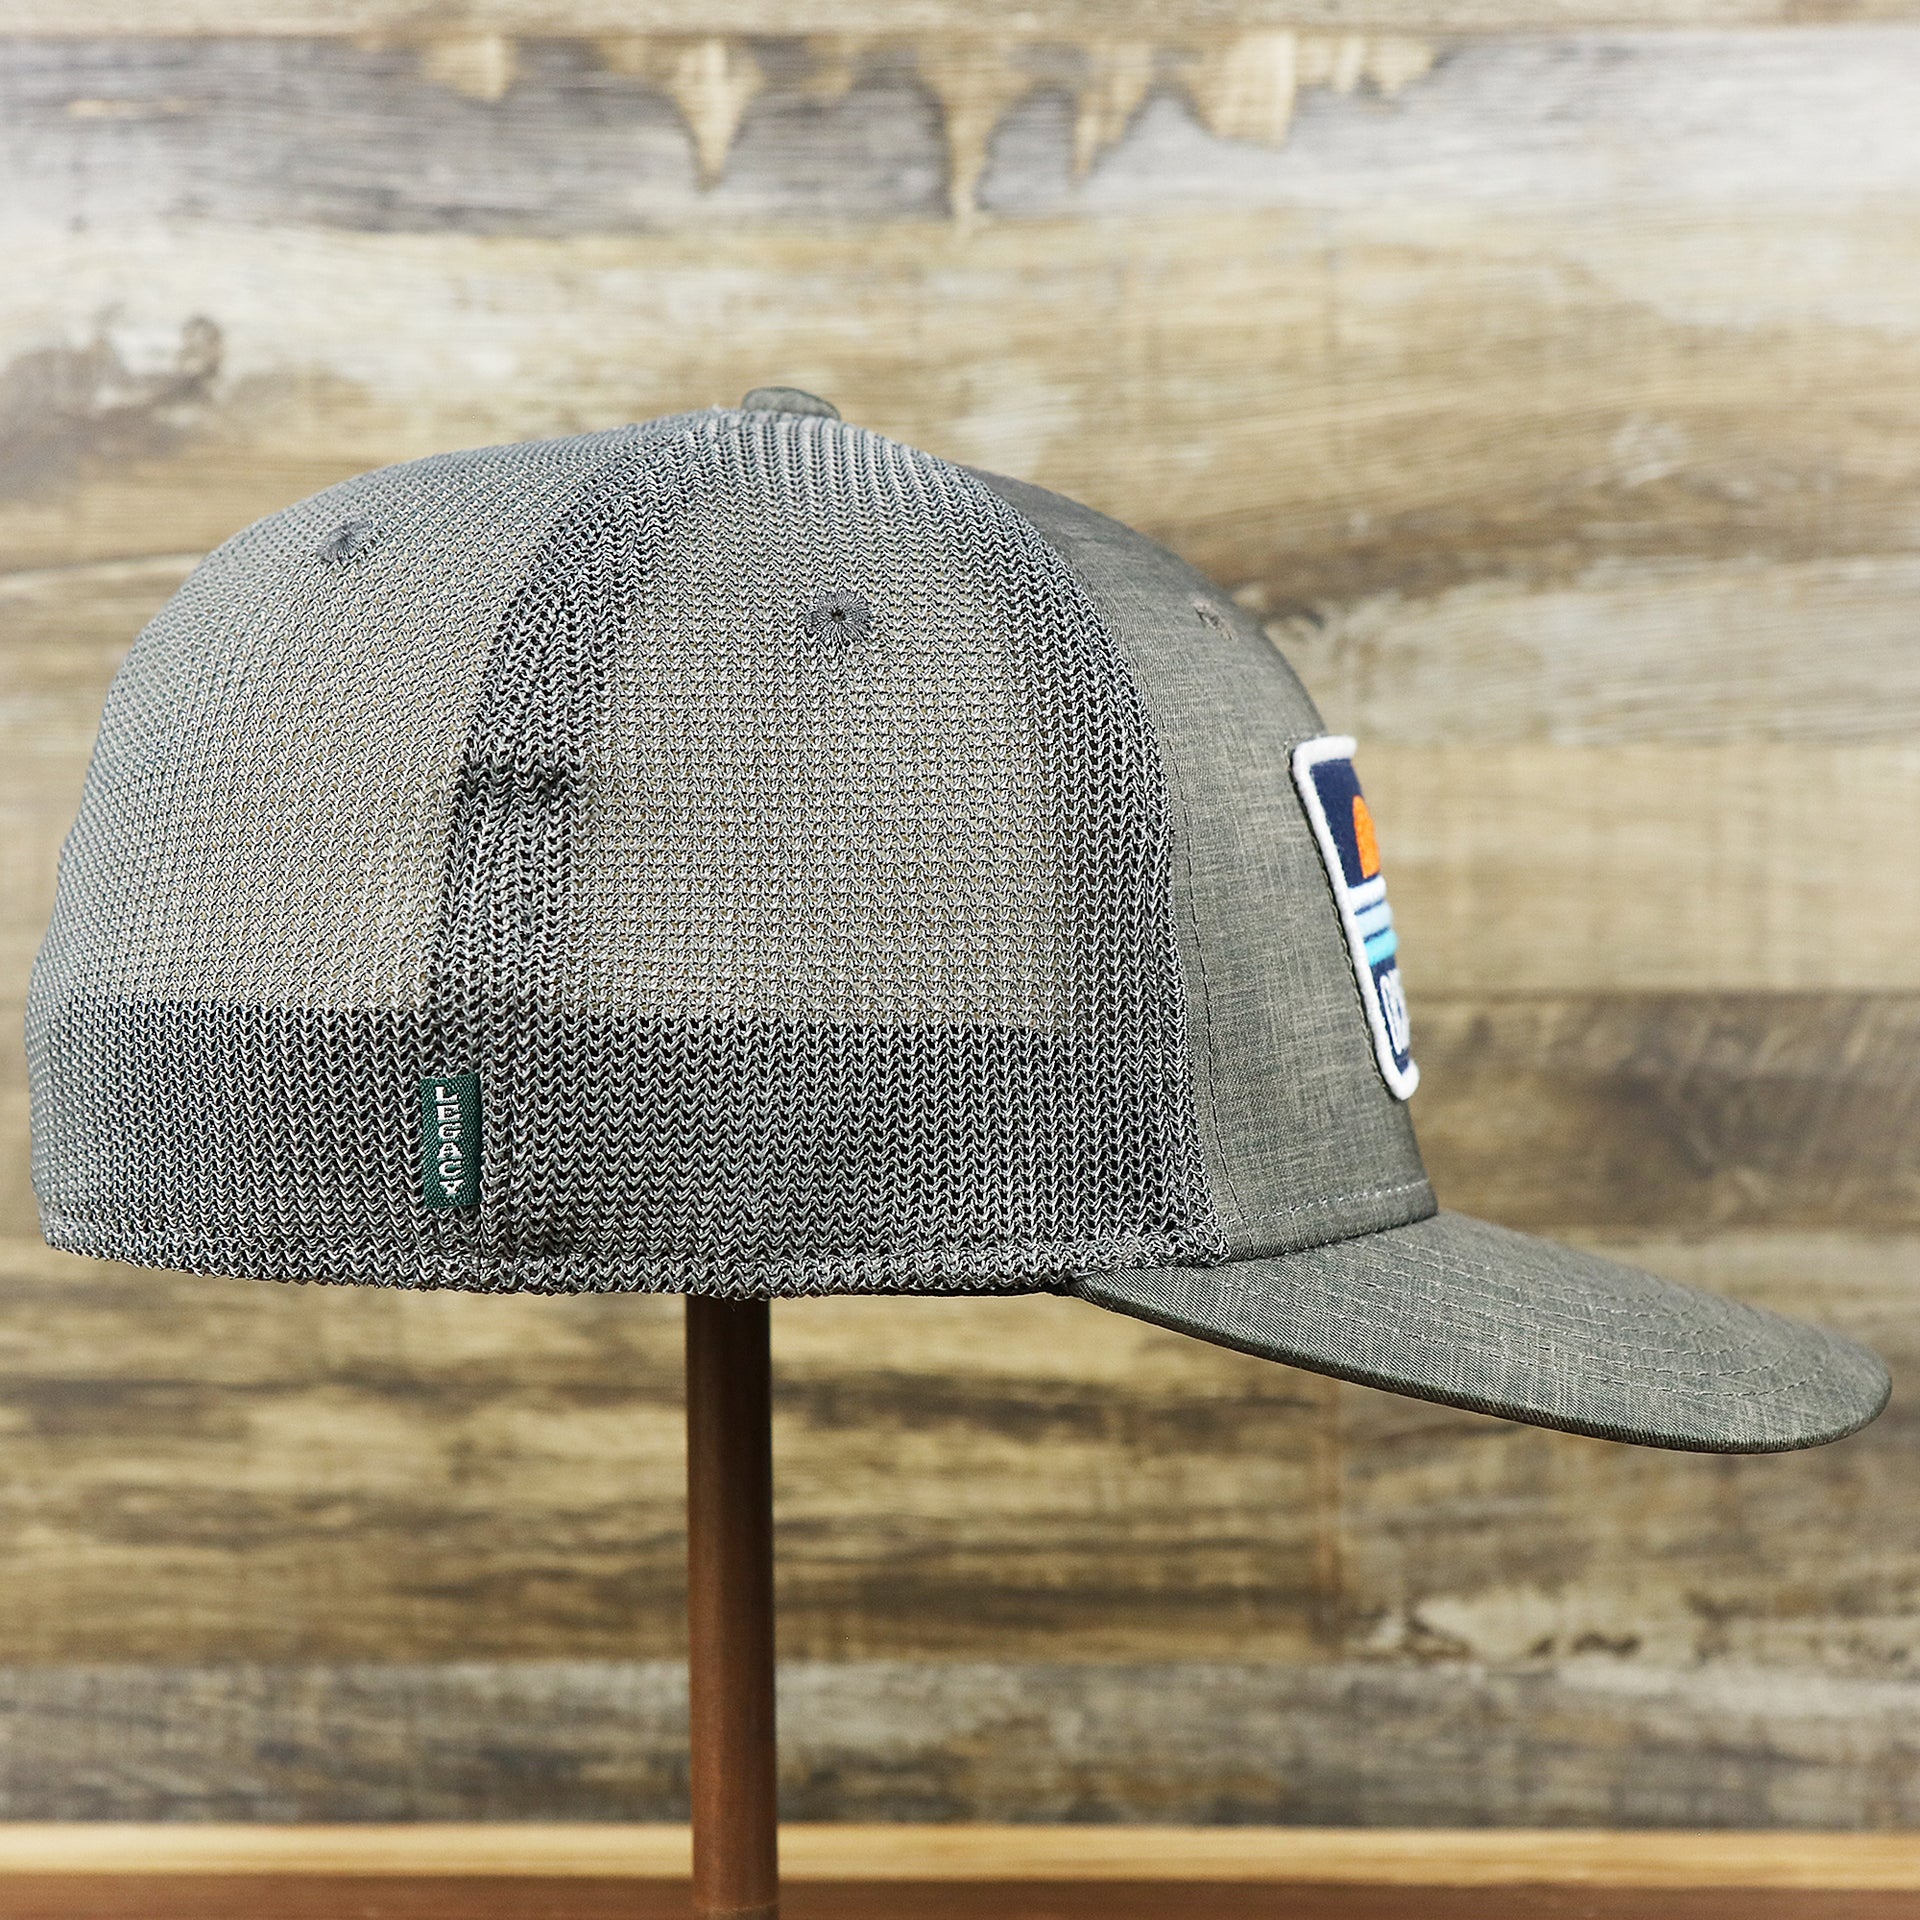 The wearer's right on the OCNJ Ocean City 1879 Sunset Wave Logo Mesh Stretch FIt Hat | Dark Green And Dark Grey Stretch Fit Hat